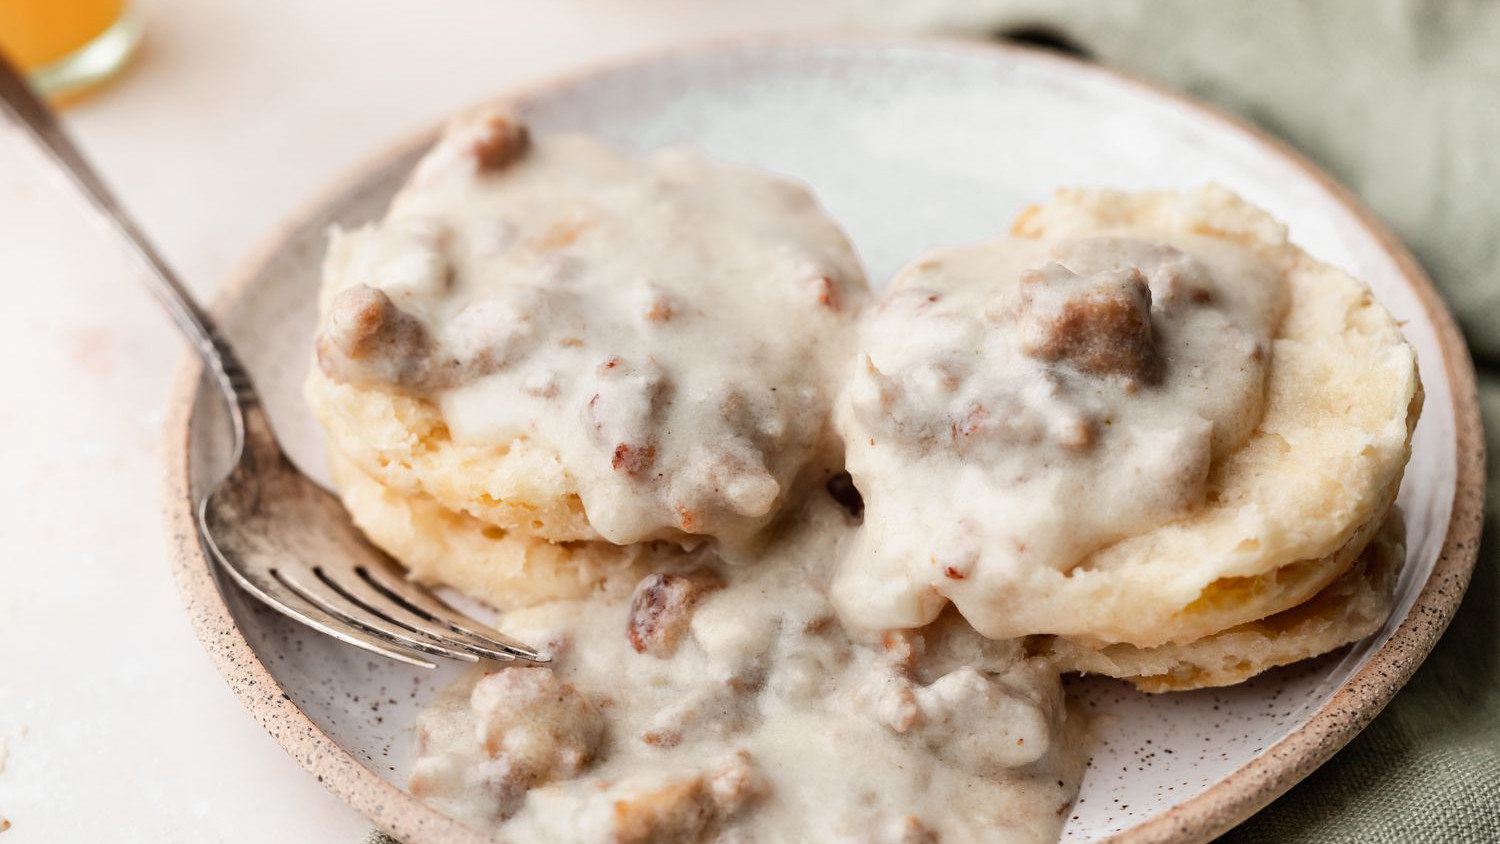 Image of Biscuits and Gravy